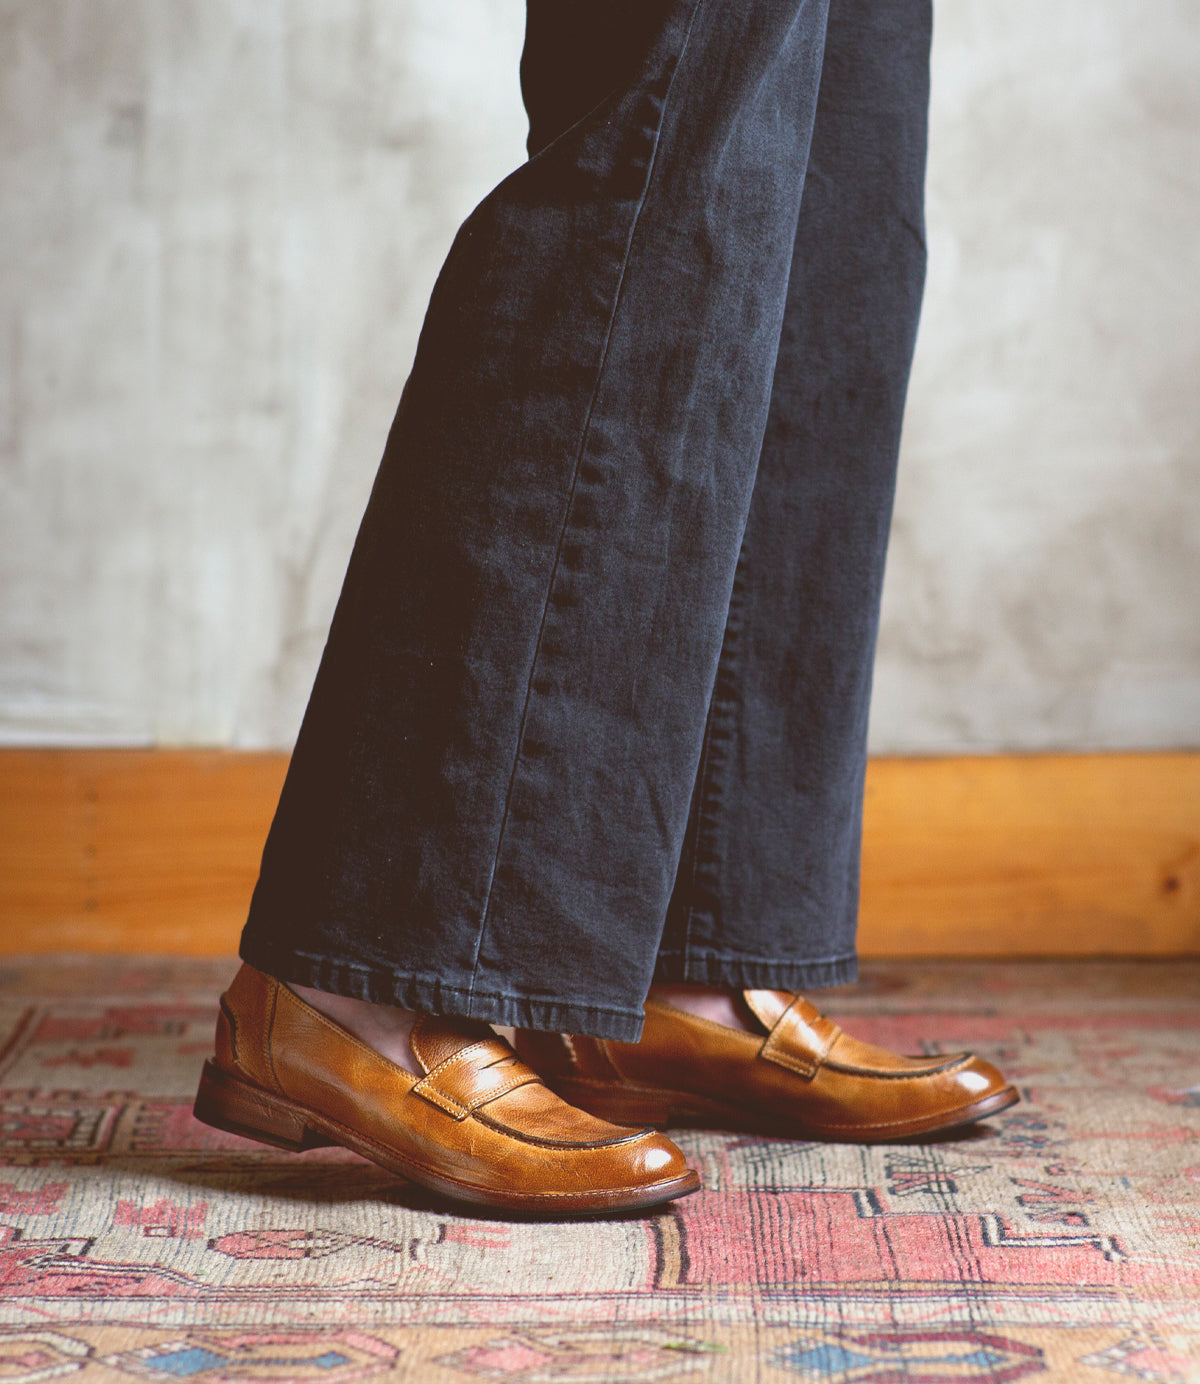 A person standing on a rug wearing a pair of Bed Stu Bonus penny loafers crafted from Italian leather.